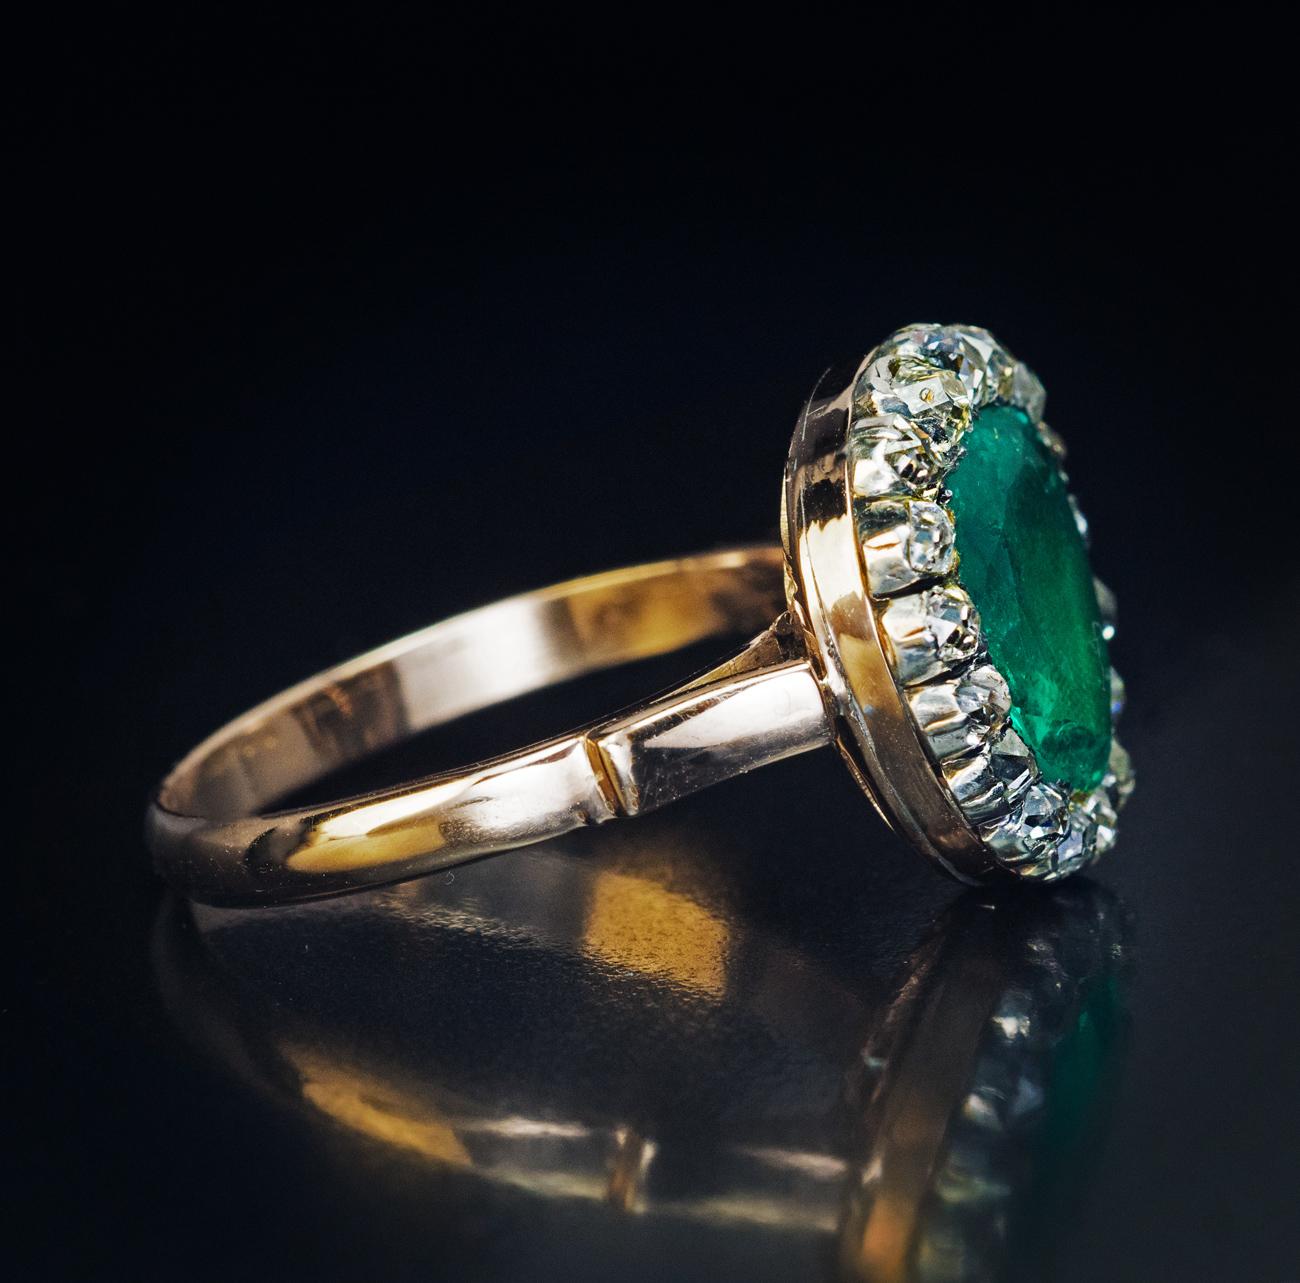 This antique heart-shaped ring from the late 1700s – early 1800s features a natural emerald of an excellent color, clarity, and saturation. The emerald is set in a closed back setting (typical for Georgian era rings) with a fabric insert behind the